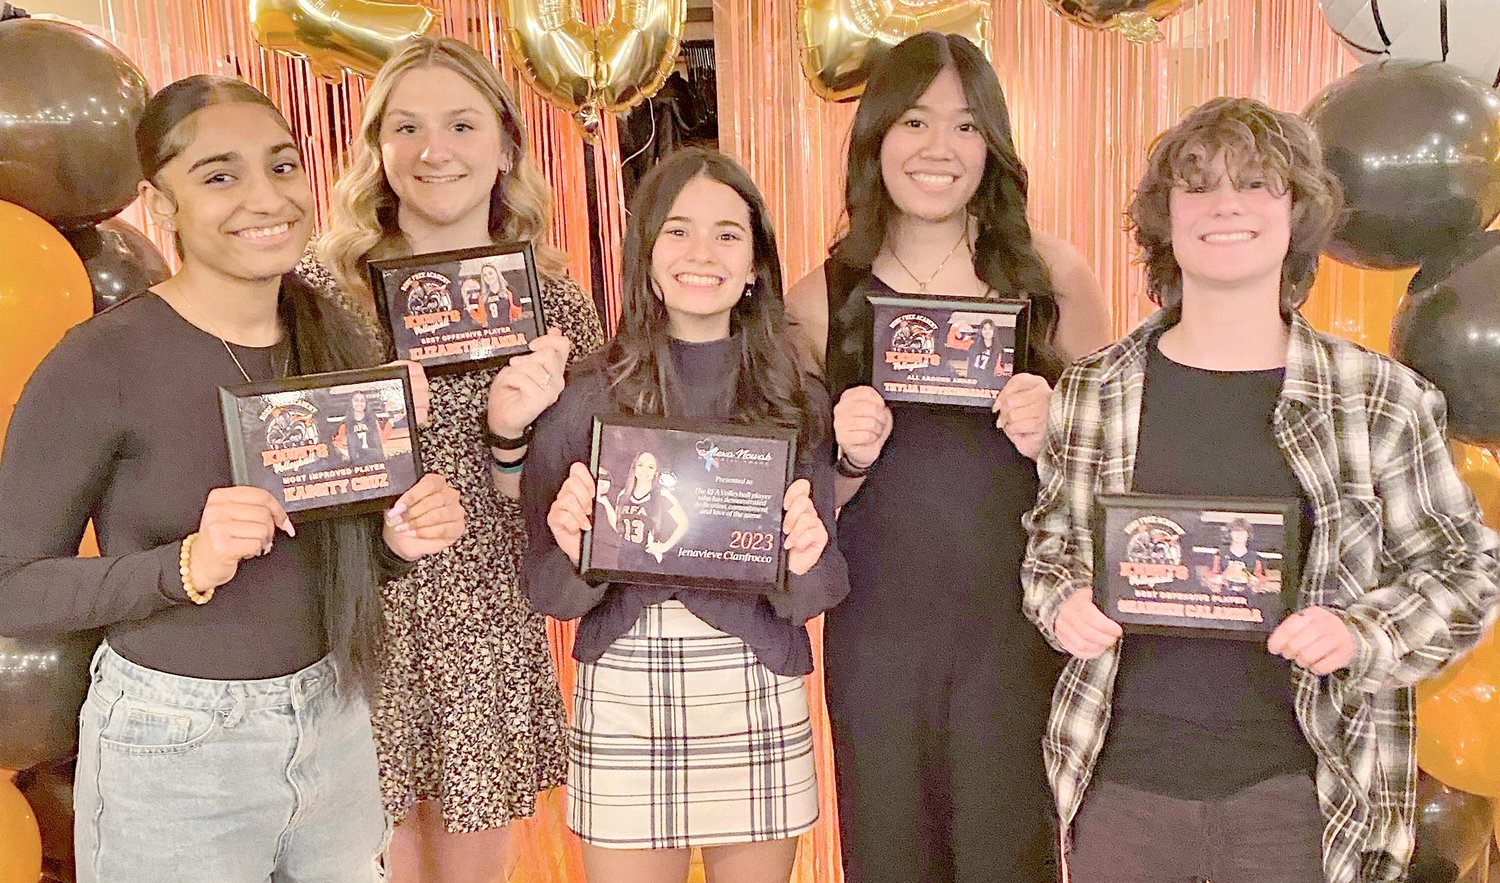 The Rome Free Academy girls volleyball team gave out awards at the end of the year banquet at Delta Lake Inn. The Black Knights won the Section III Class A title, the first sectional title for the program since 1983. From left: Kassity Cruz, most improved player; Elizabeth Hanba, best offensive player; Jena Cianfrocco, coach’s award for dedication and commitment; Thylia Keoviengsamay, most valuable all around player; and Shannen Calandra, best defensive player.